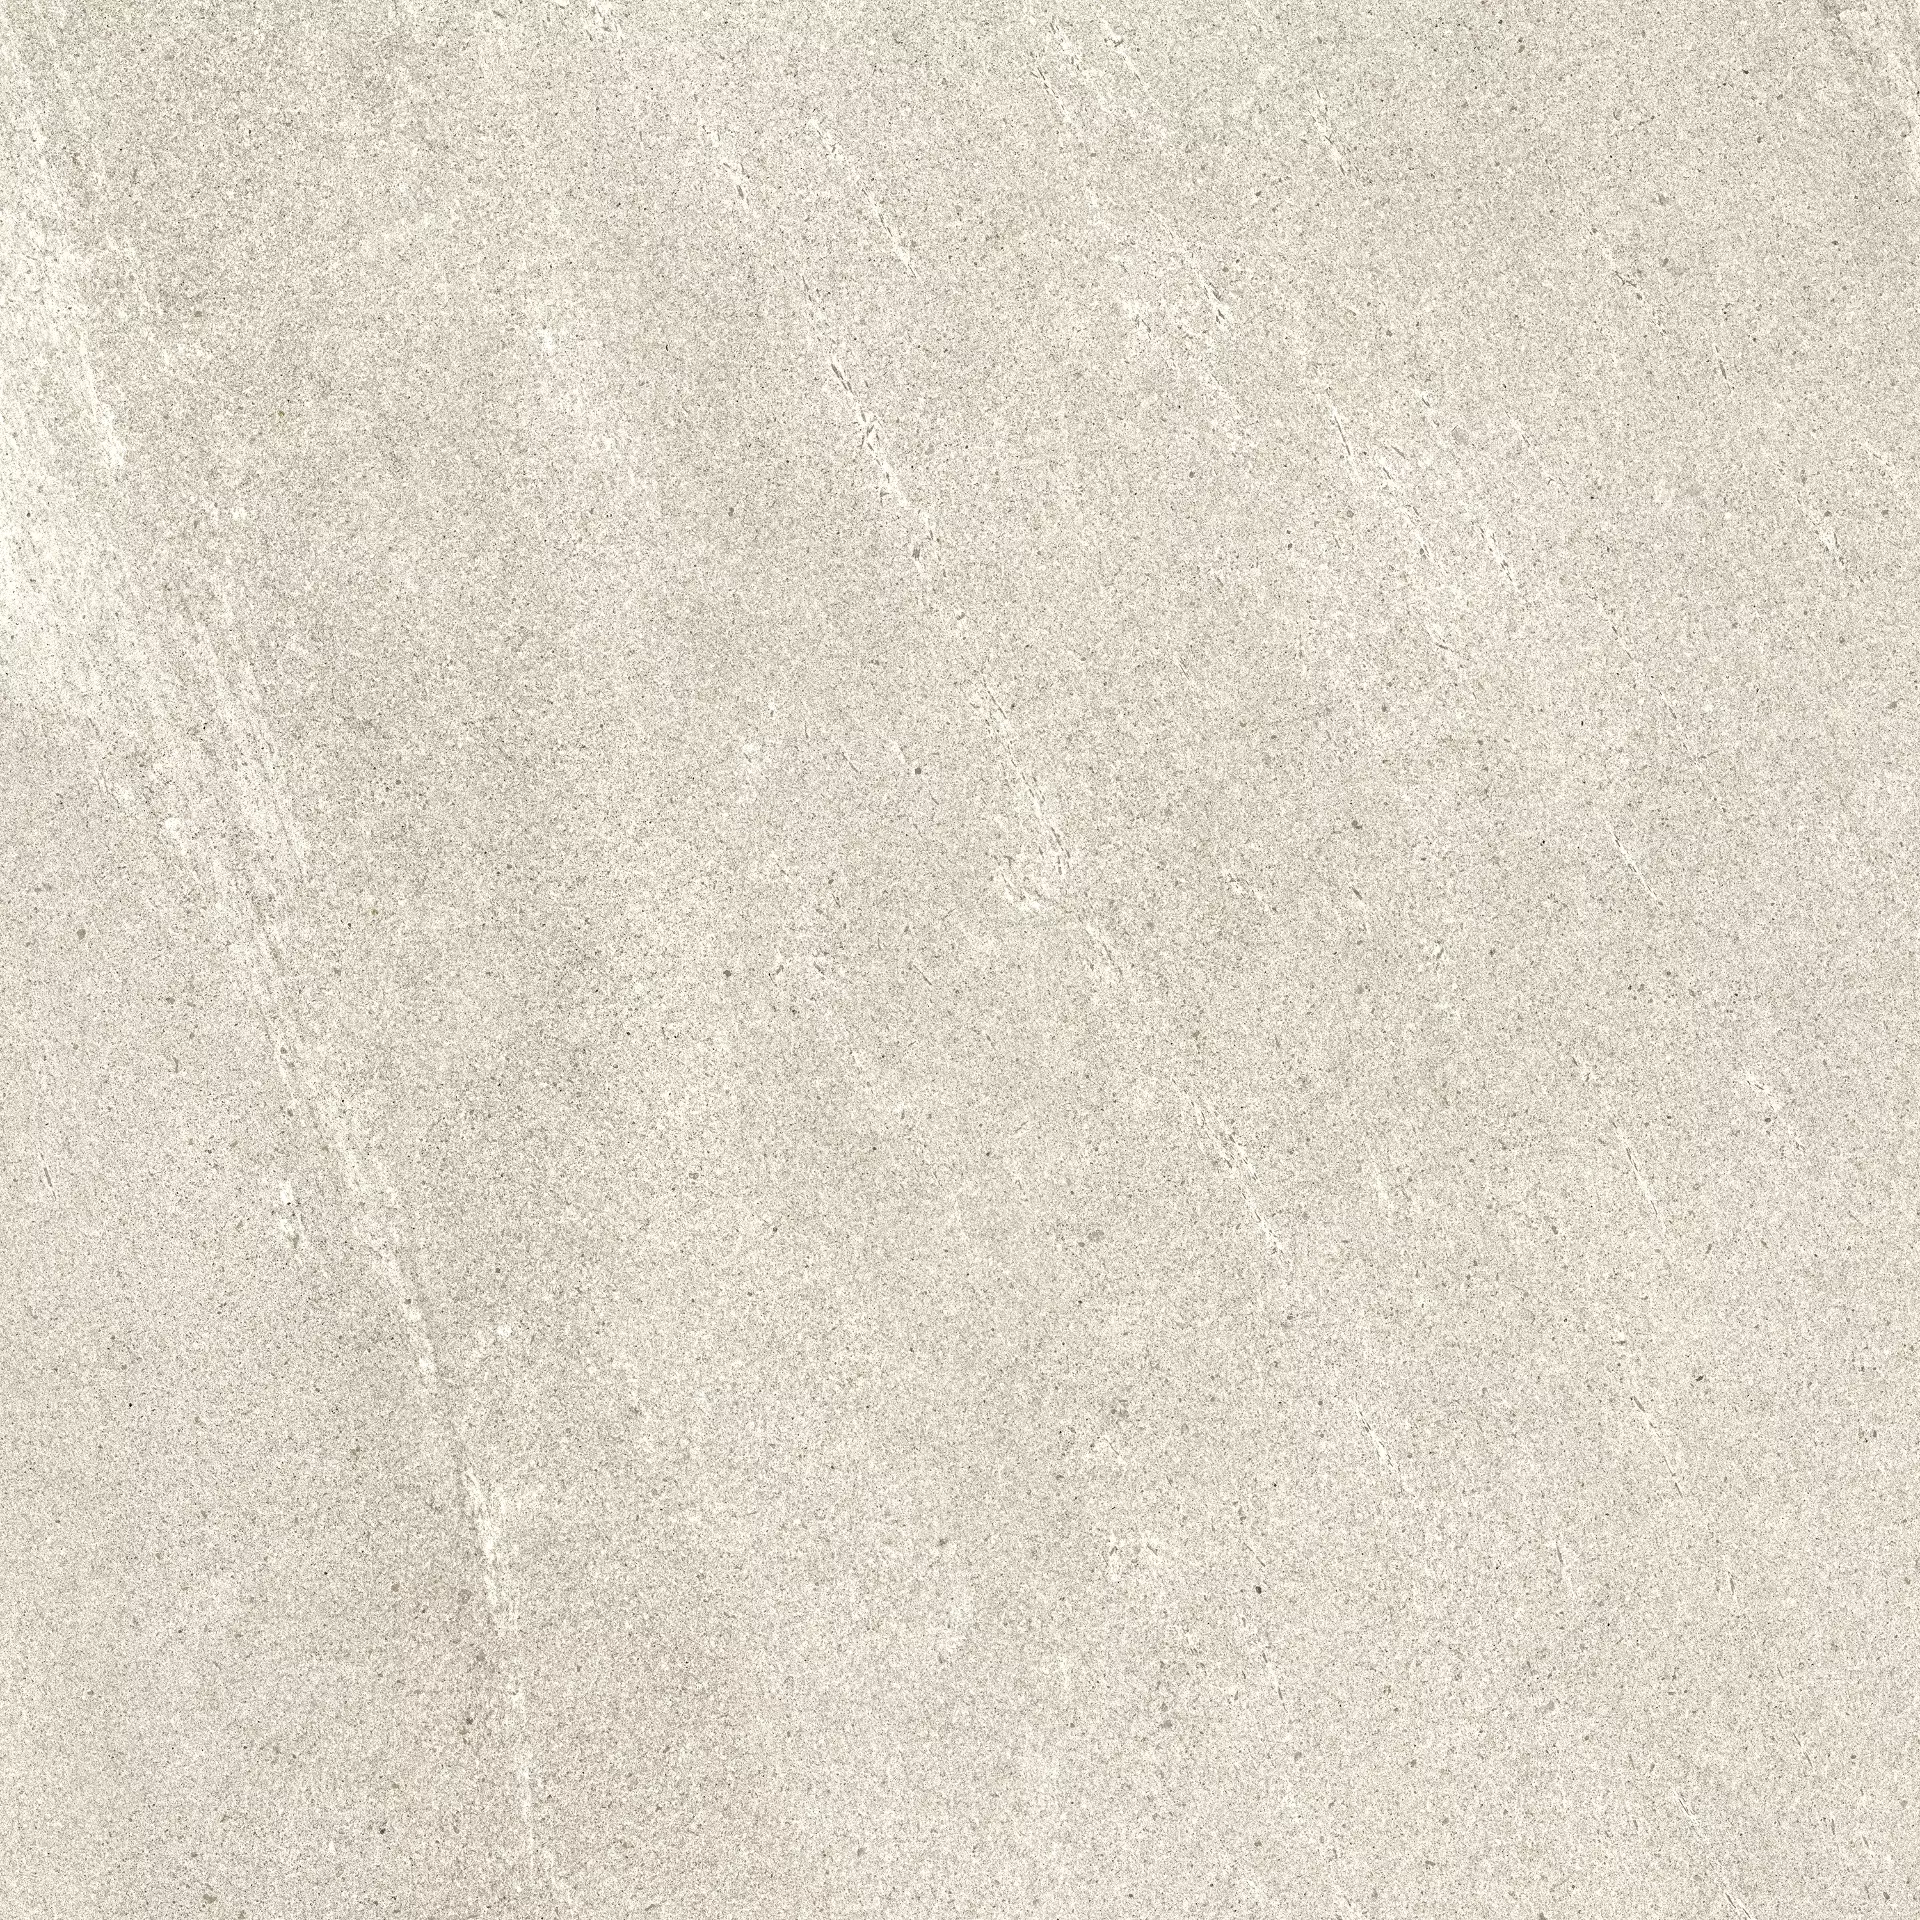 Cottodeste Blend Stone Clear Naturale Protect EG8BS00 120x120cm rectified 14mm